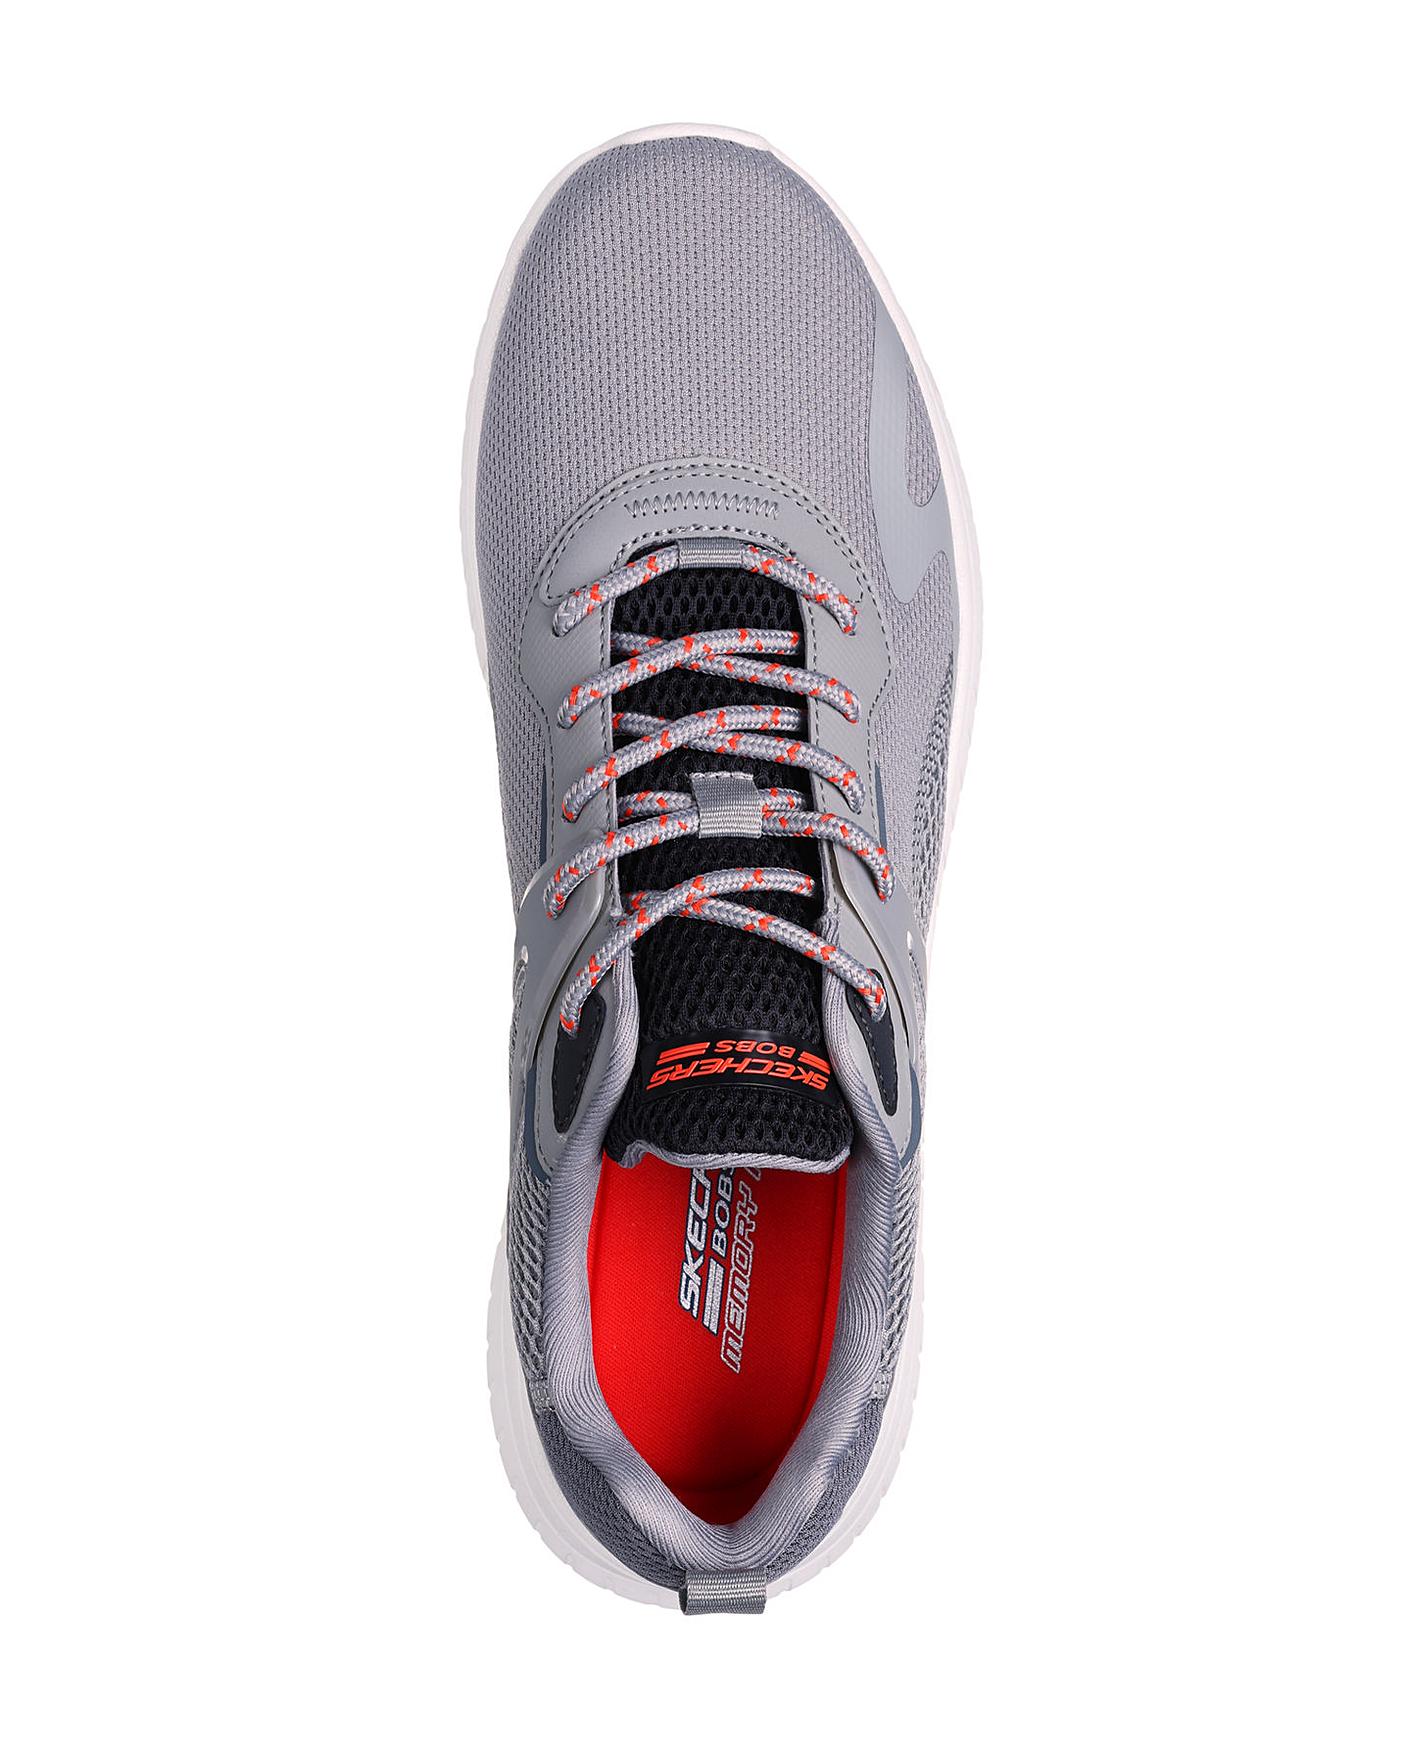 Skechers Bobs Squad Chaos Trainers | J D Williams